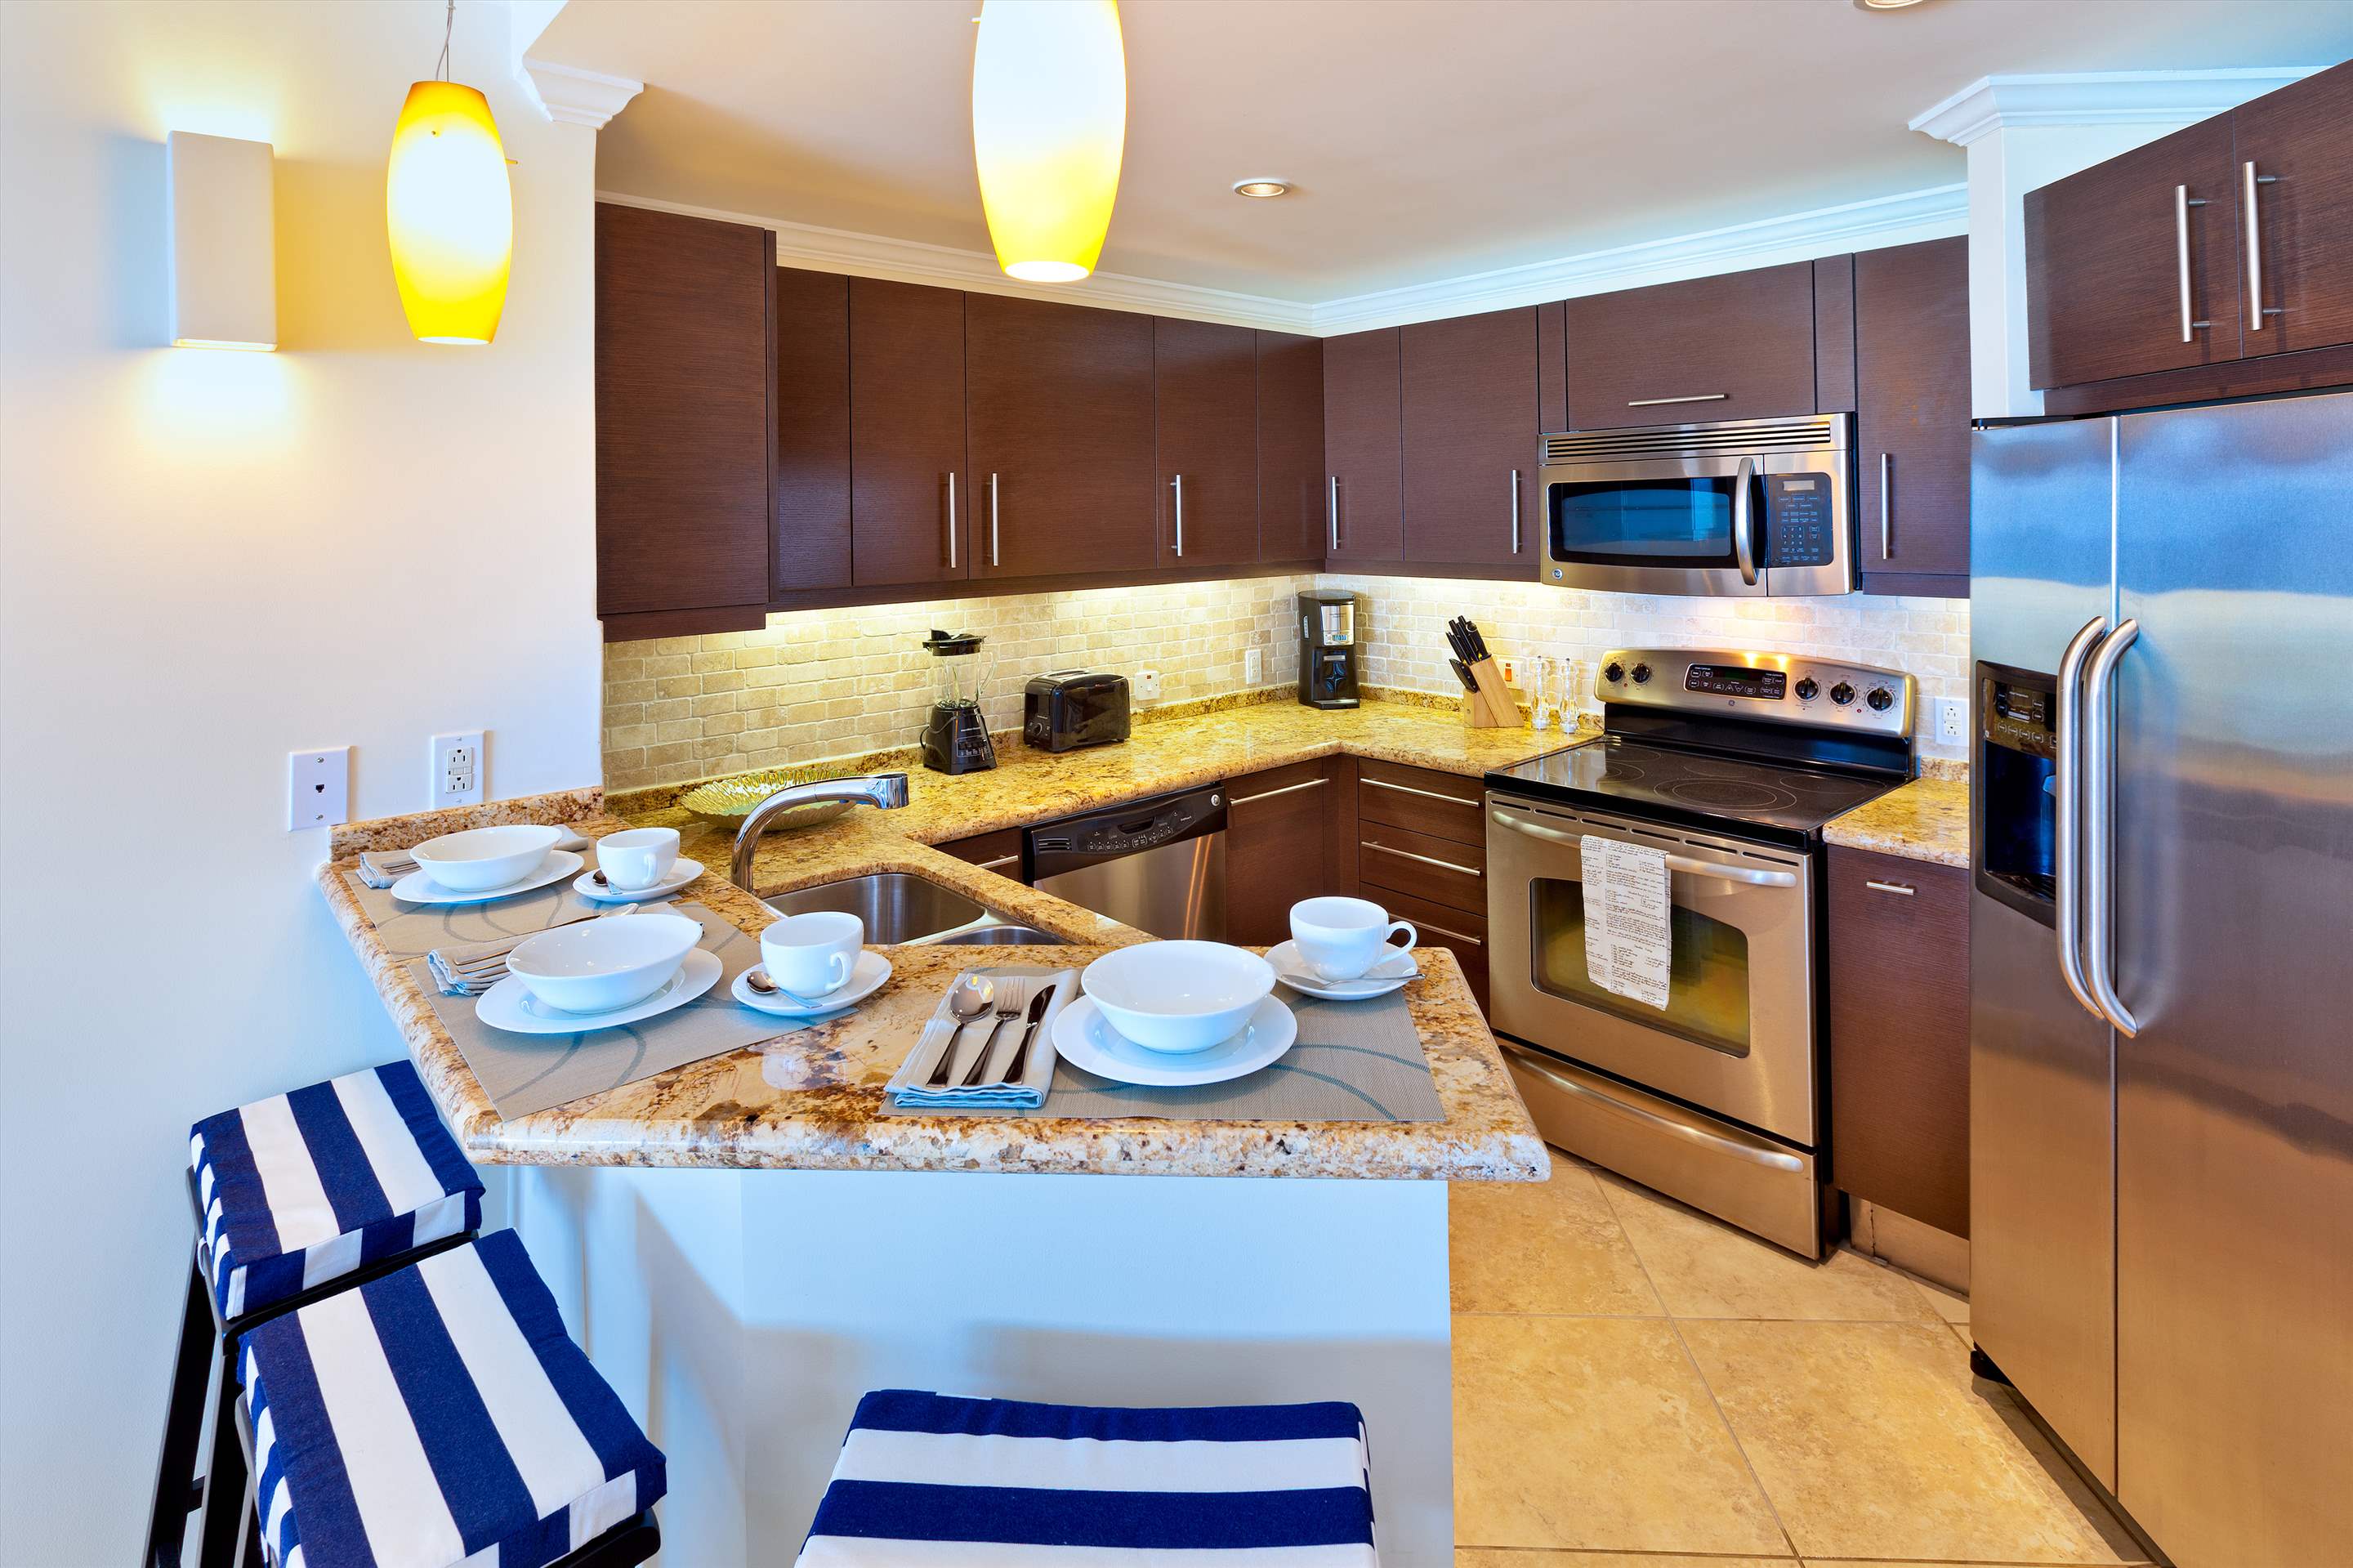 Sapphire Beach 517, 2 bedroom, 3 bedroom apartment in St. Lawrence Gap & South Coast, Barbados Photo #5